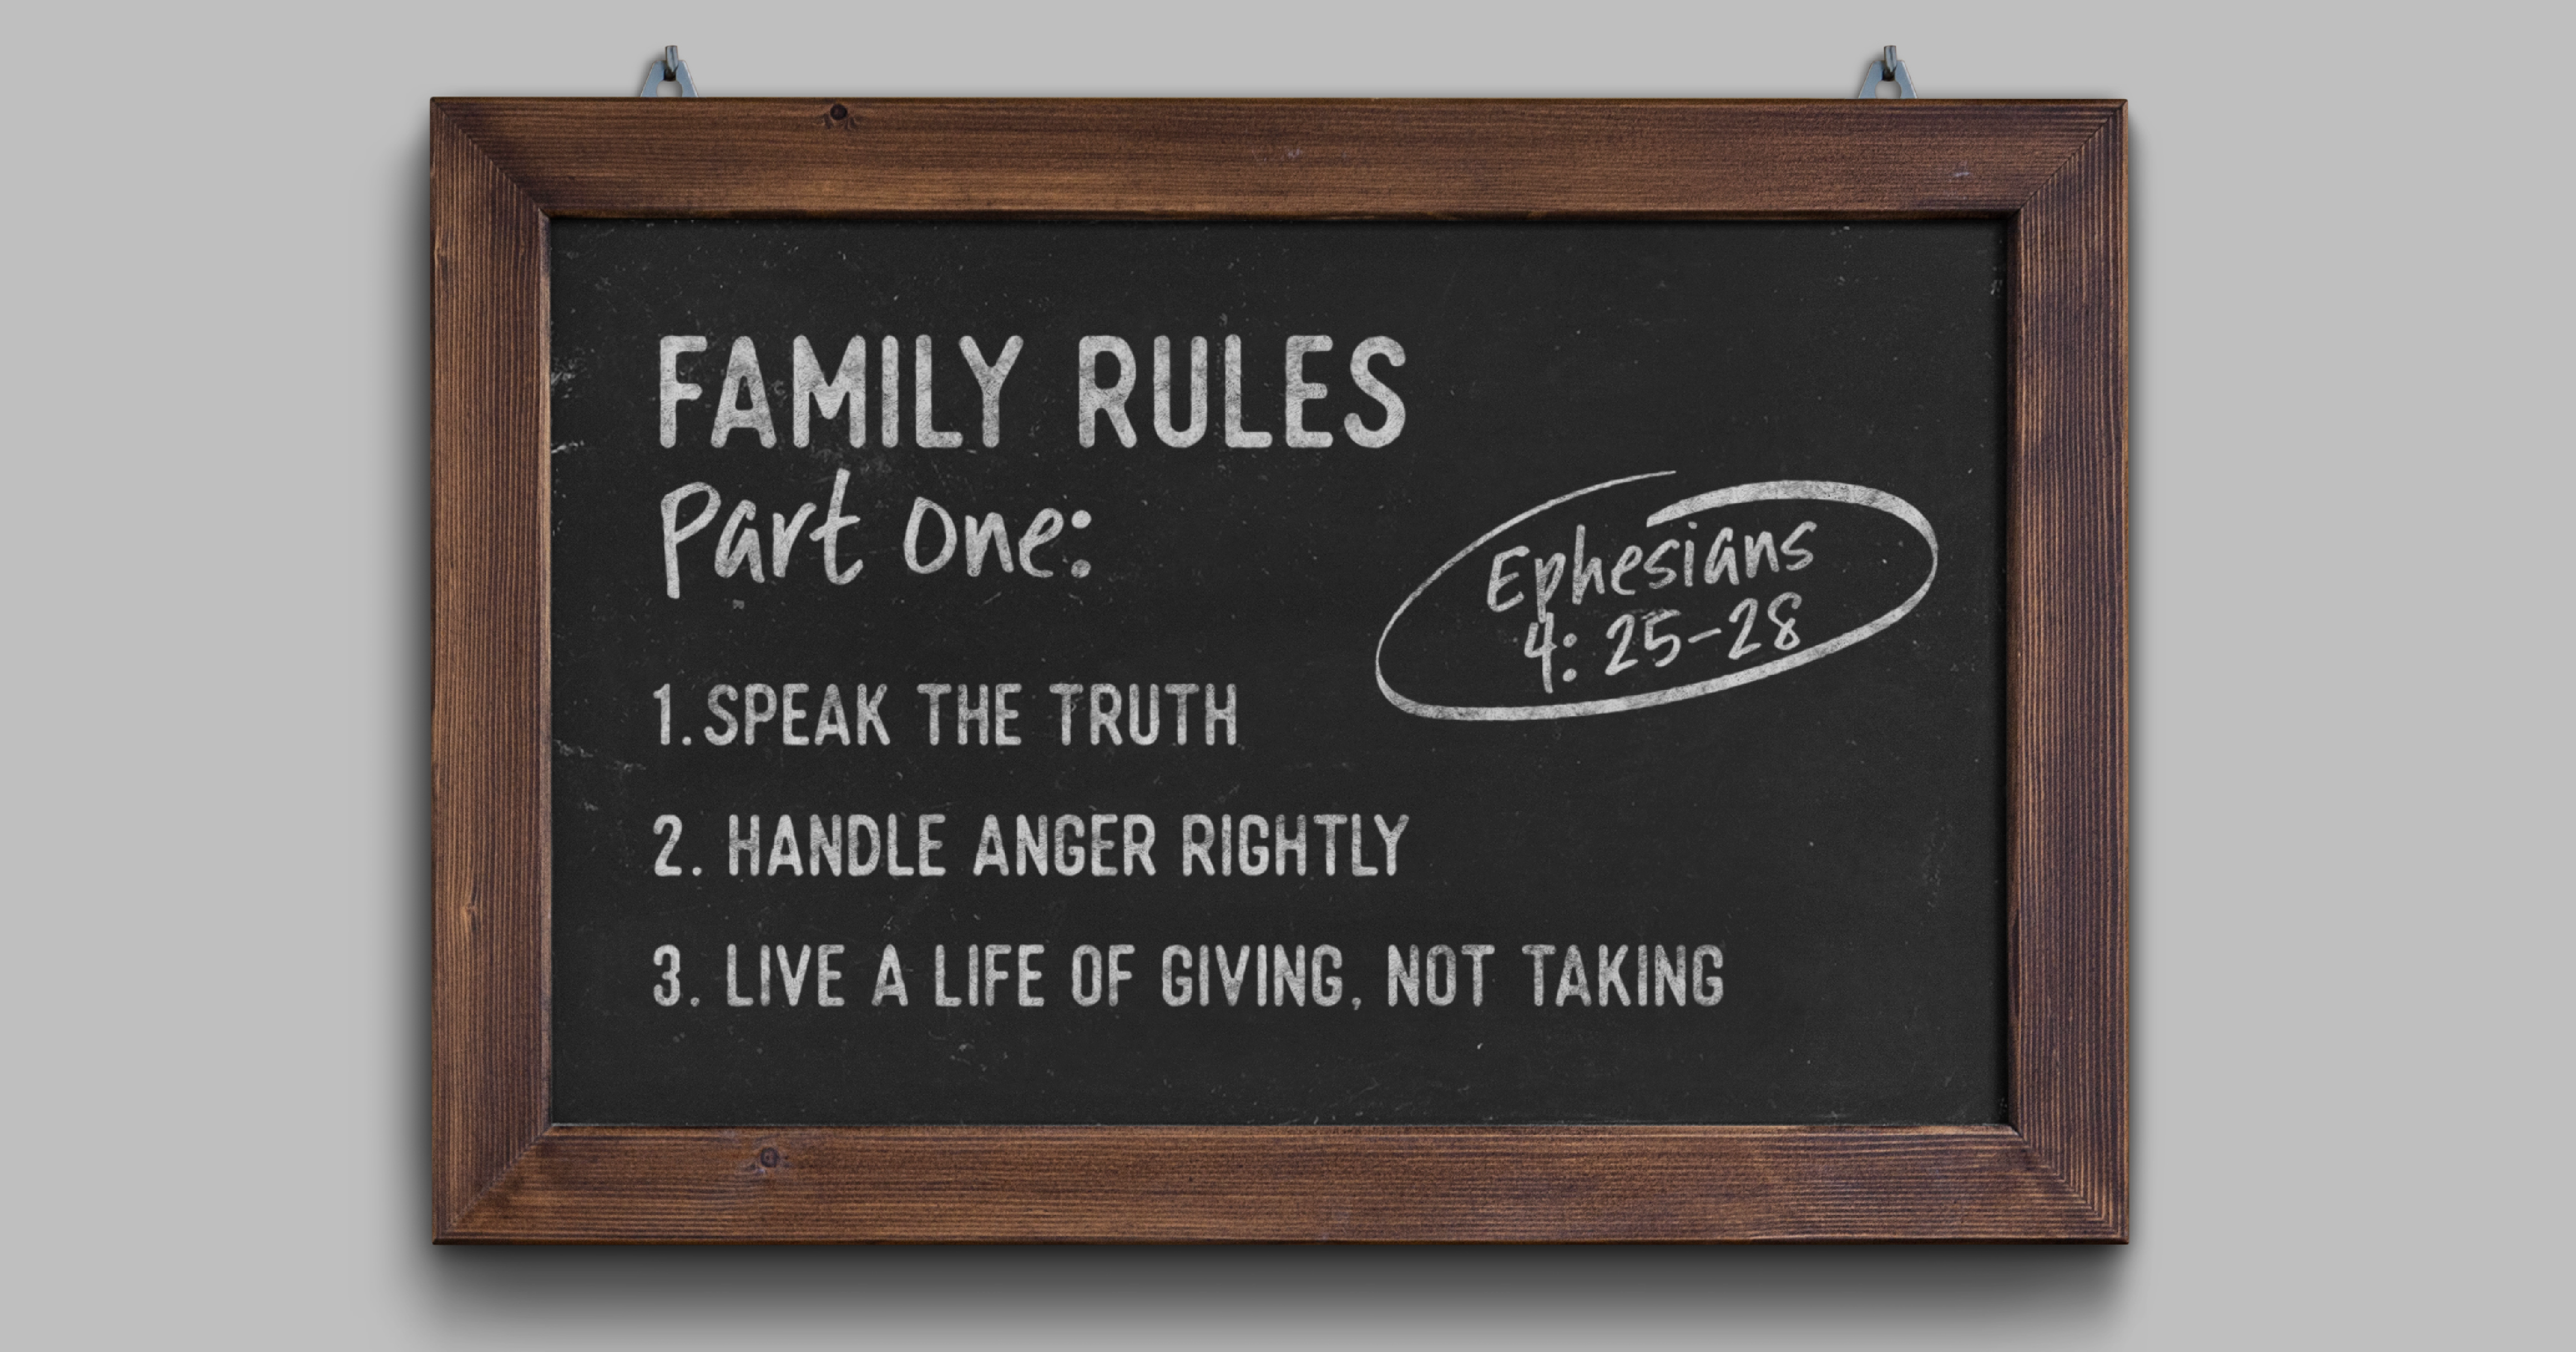 Family Rules Part One Chalkboard showing the first three rules from Ephesians 4:25-28